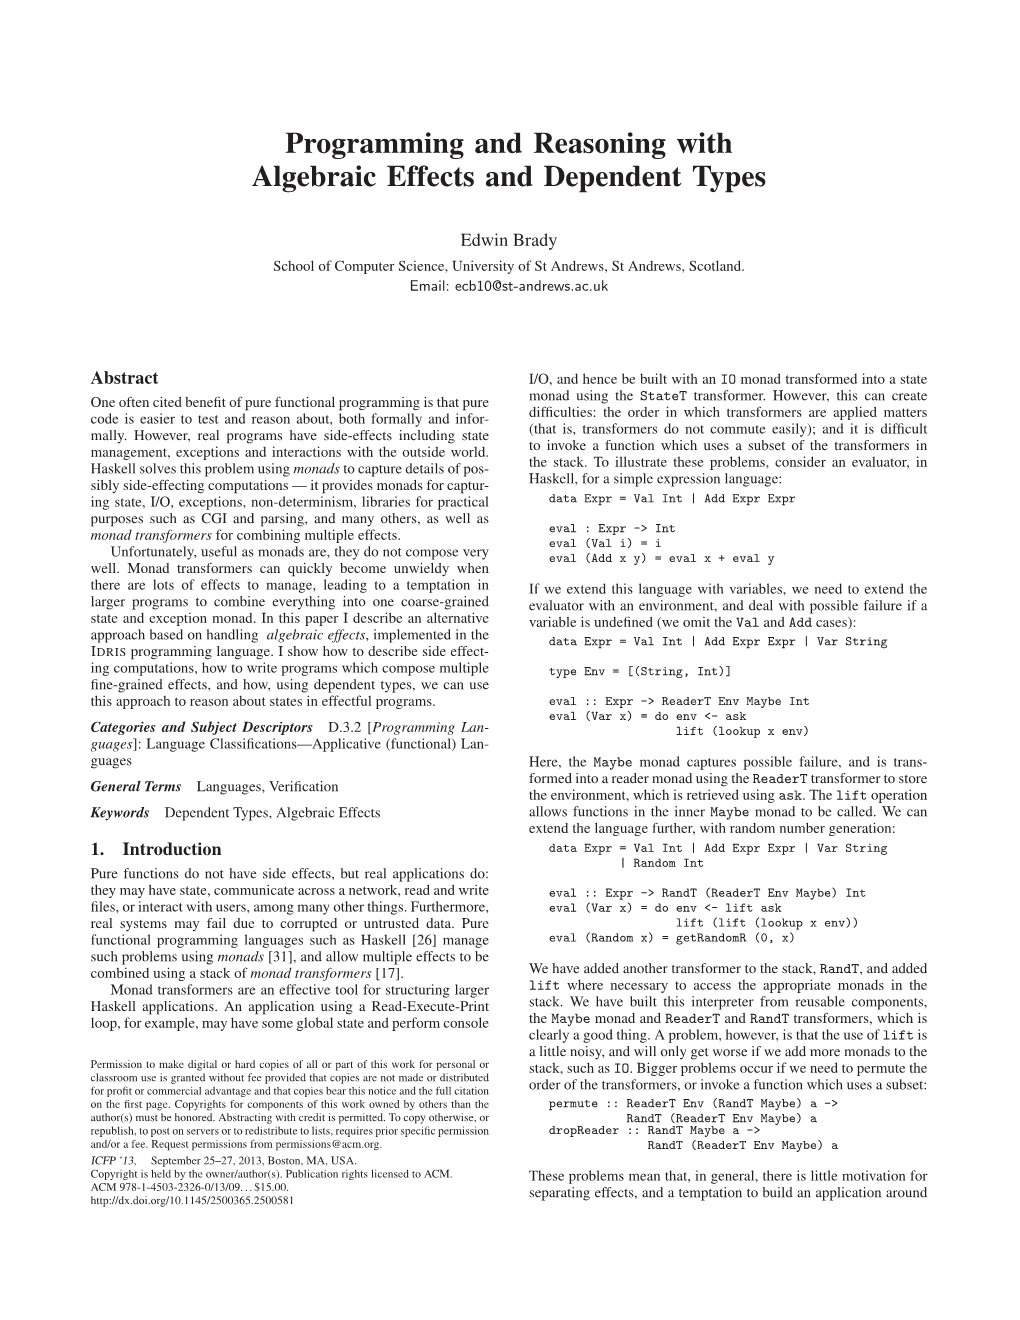 Programming and Reasoning with Algebraic Effects and Dependent Types